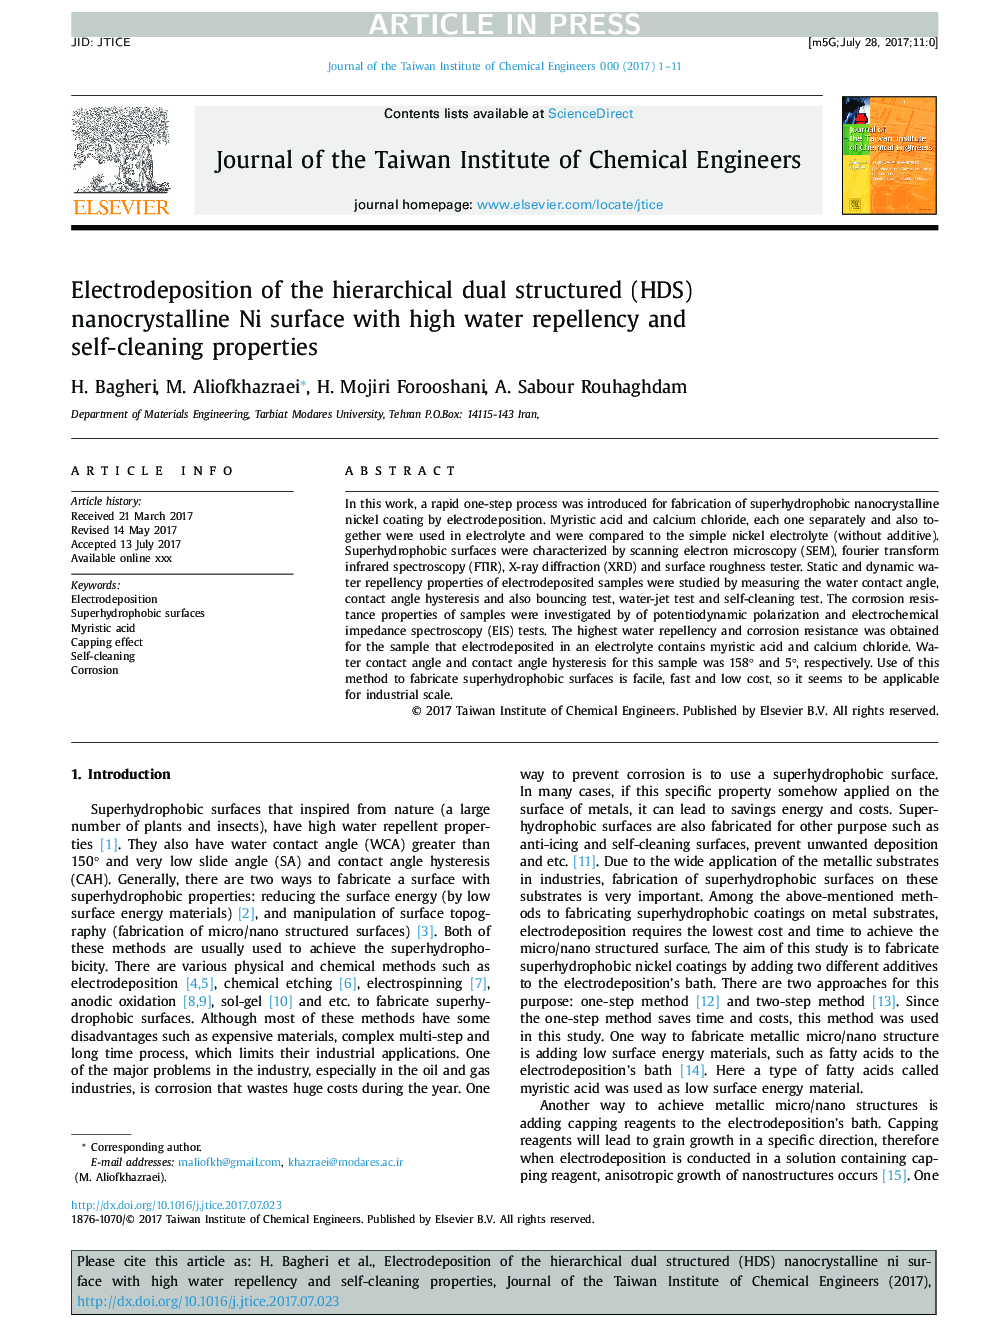 Electrodeposition of the hierarchical dual structured (HDS) nanocrystalline Ni surface with high water repellency and self-cleaning properties